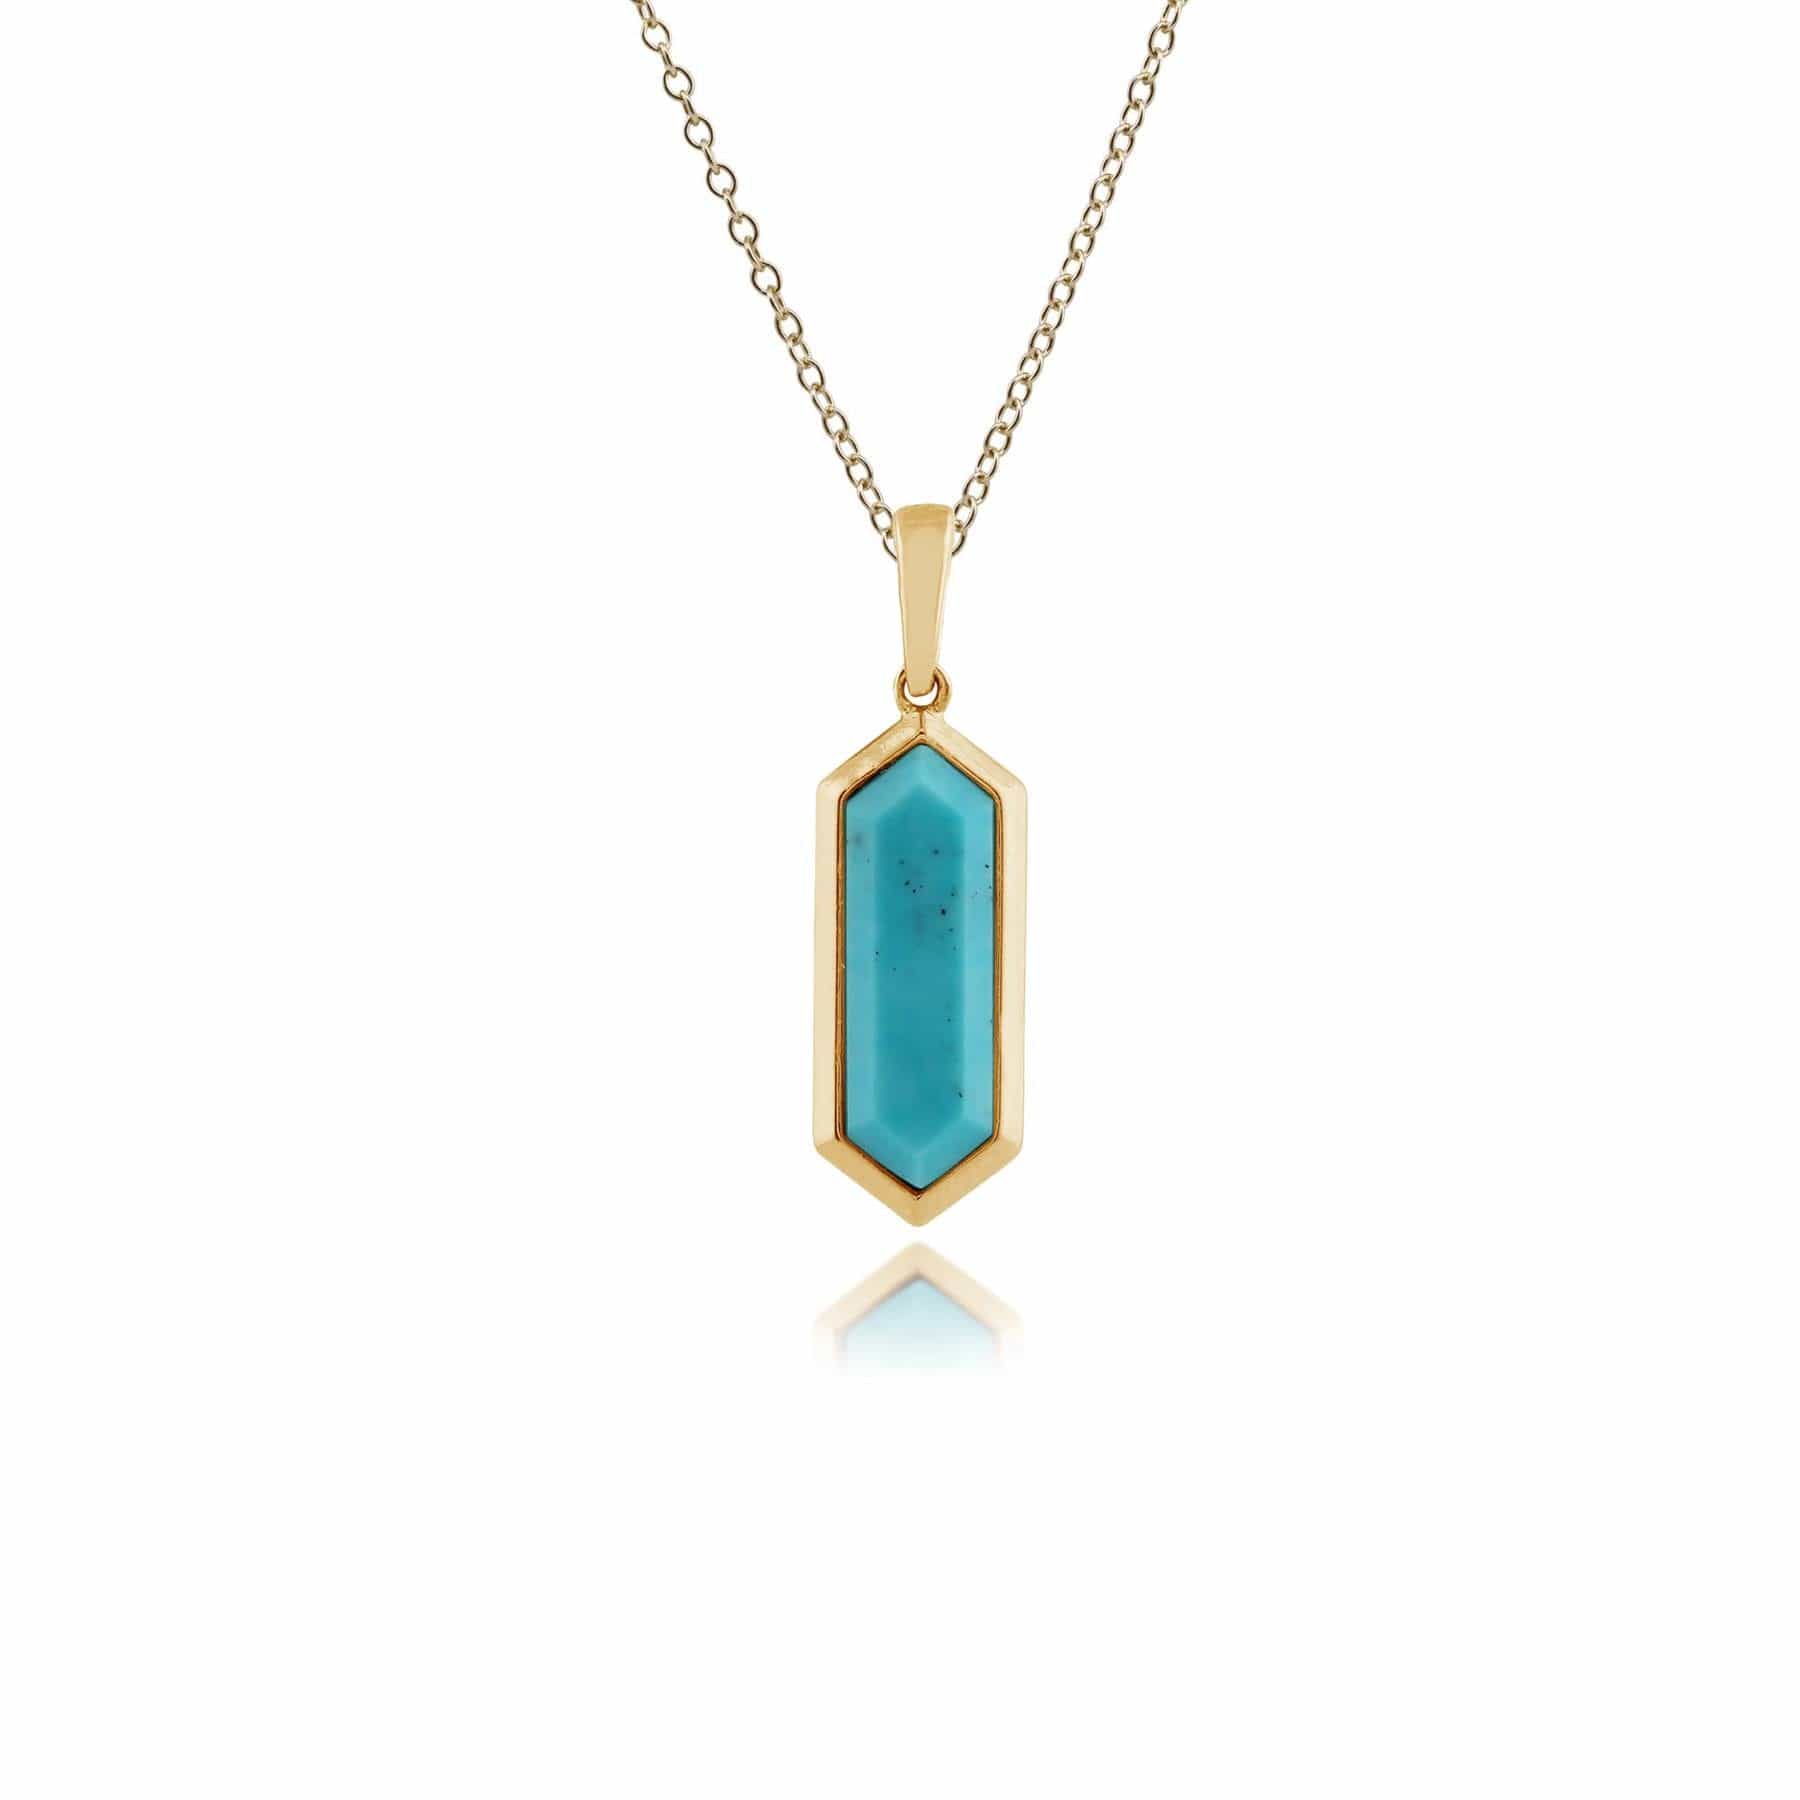 Geometric Hexagon Turquoise Prism Drop Pendant in Gold Plated Silver - Gemondo